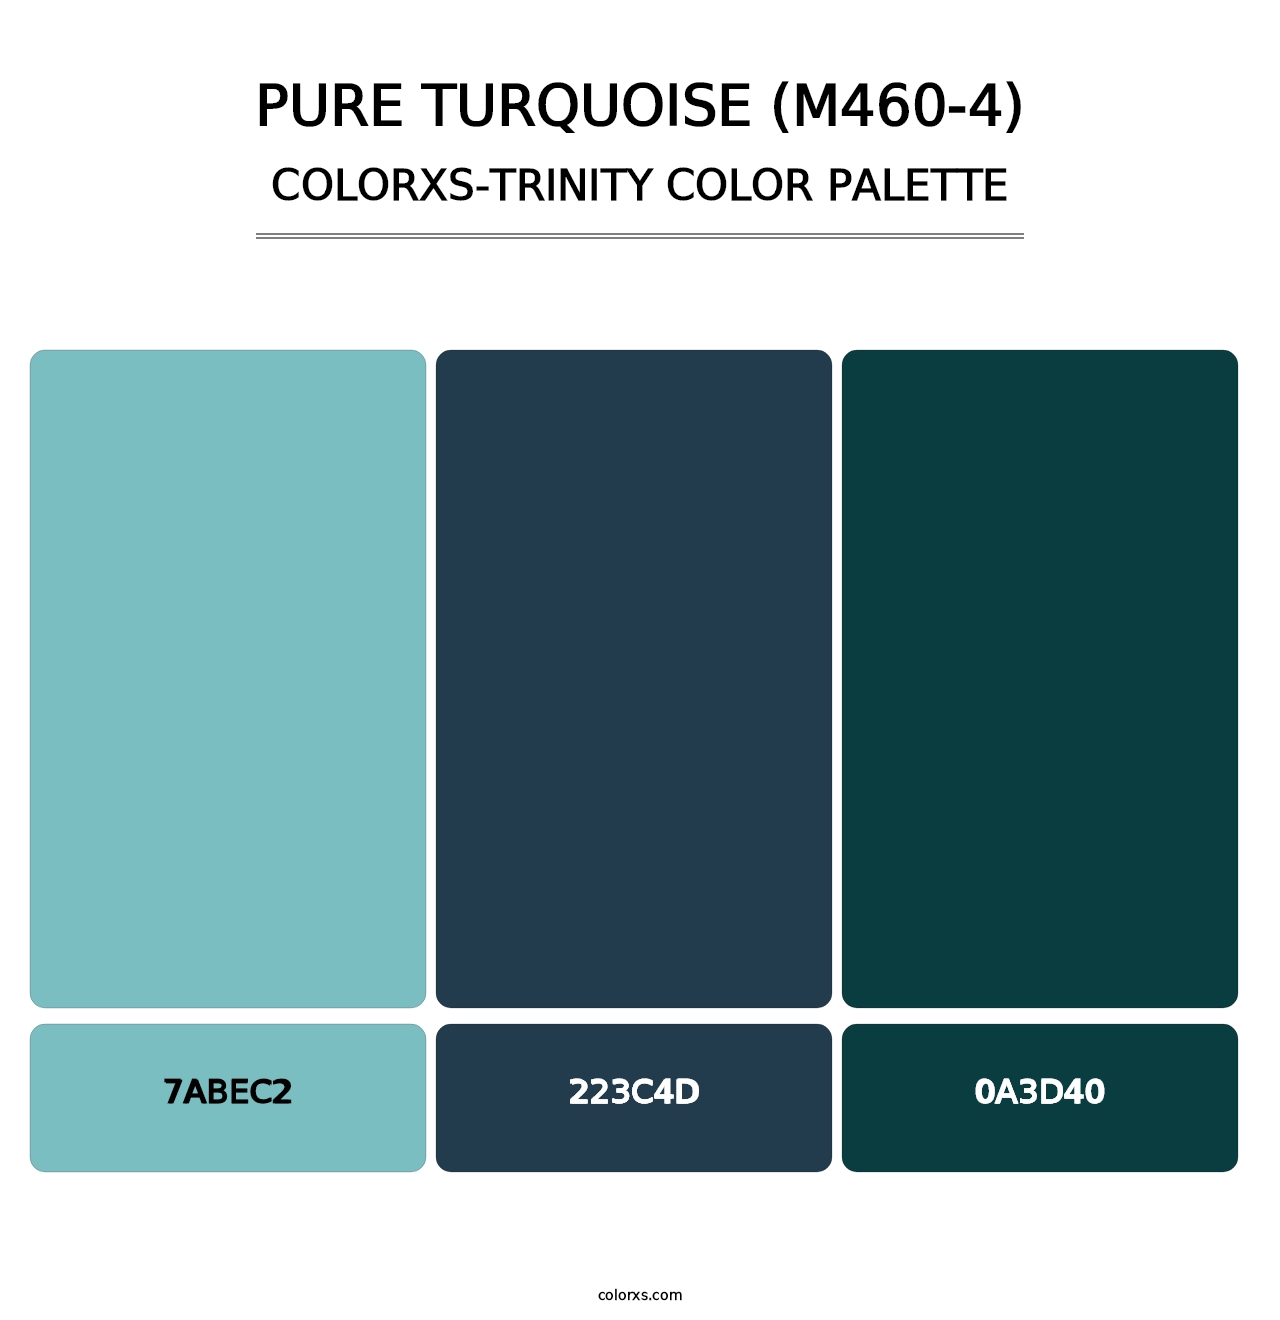 Pure Turquoise (M460-4) - Colorxs Trinity Palette